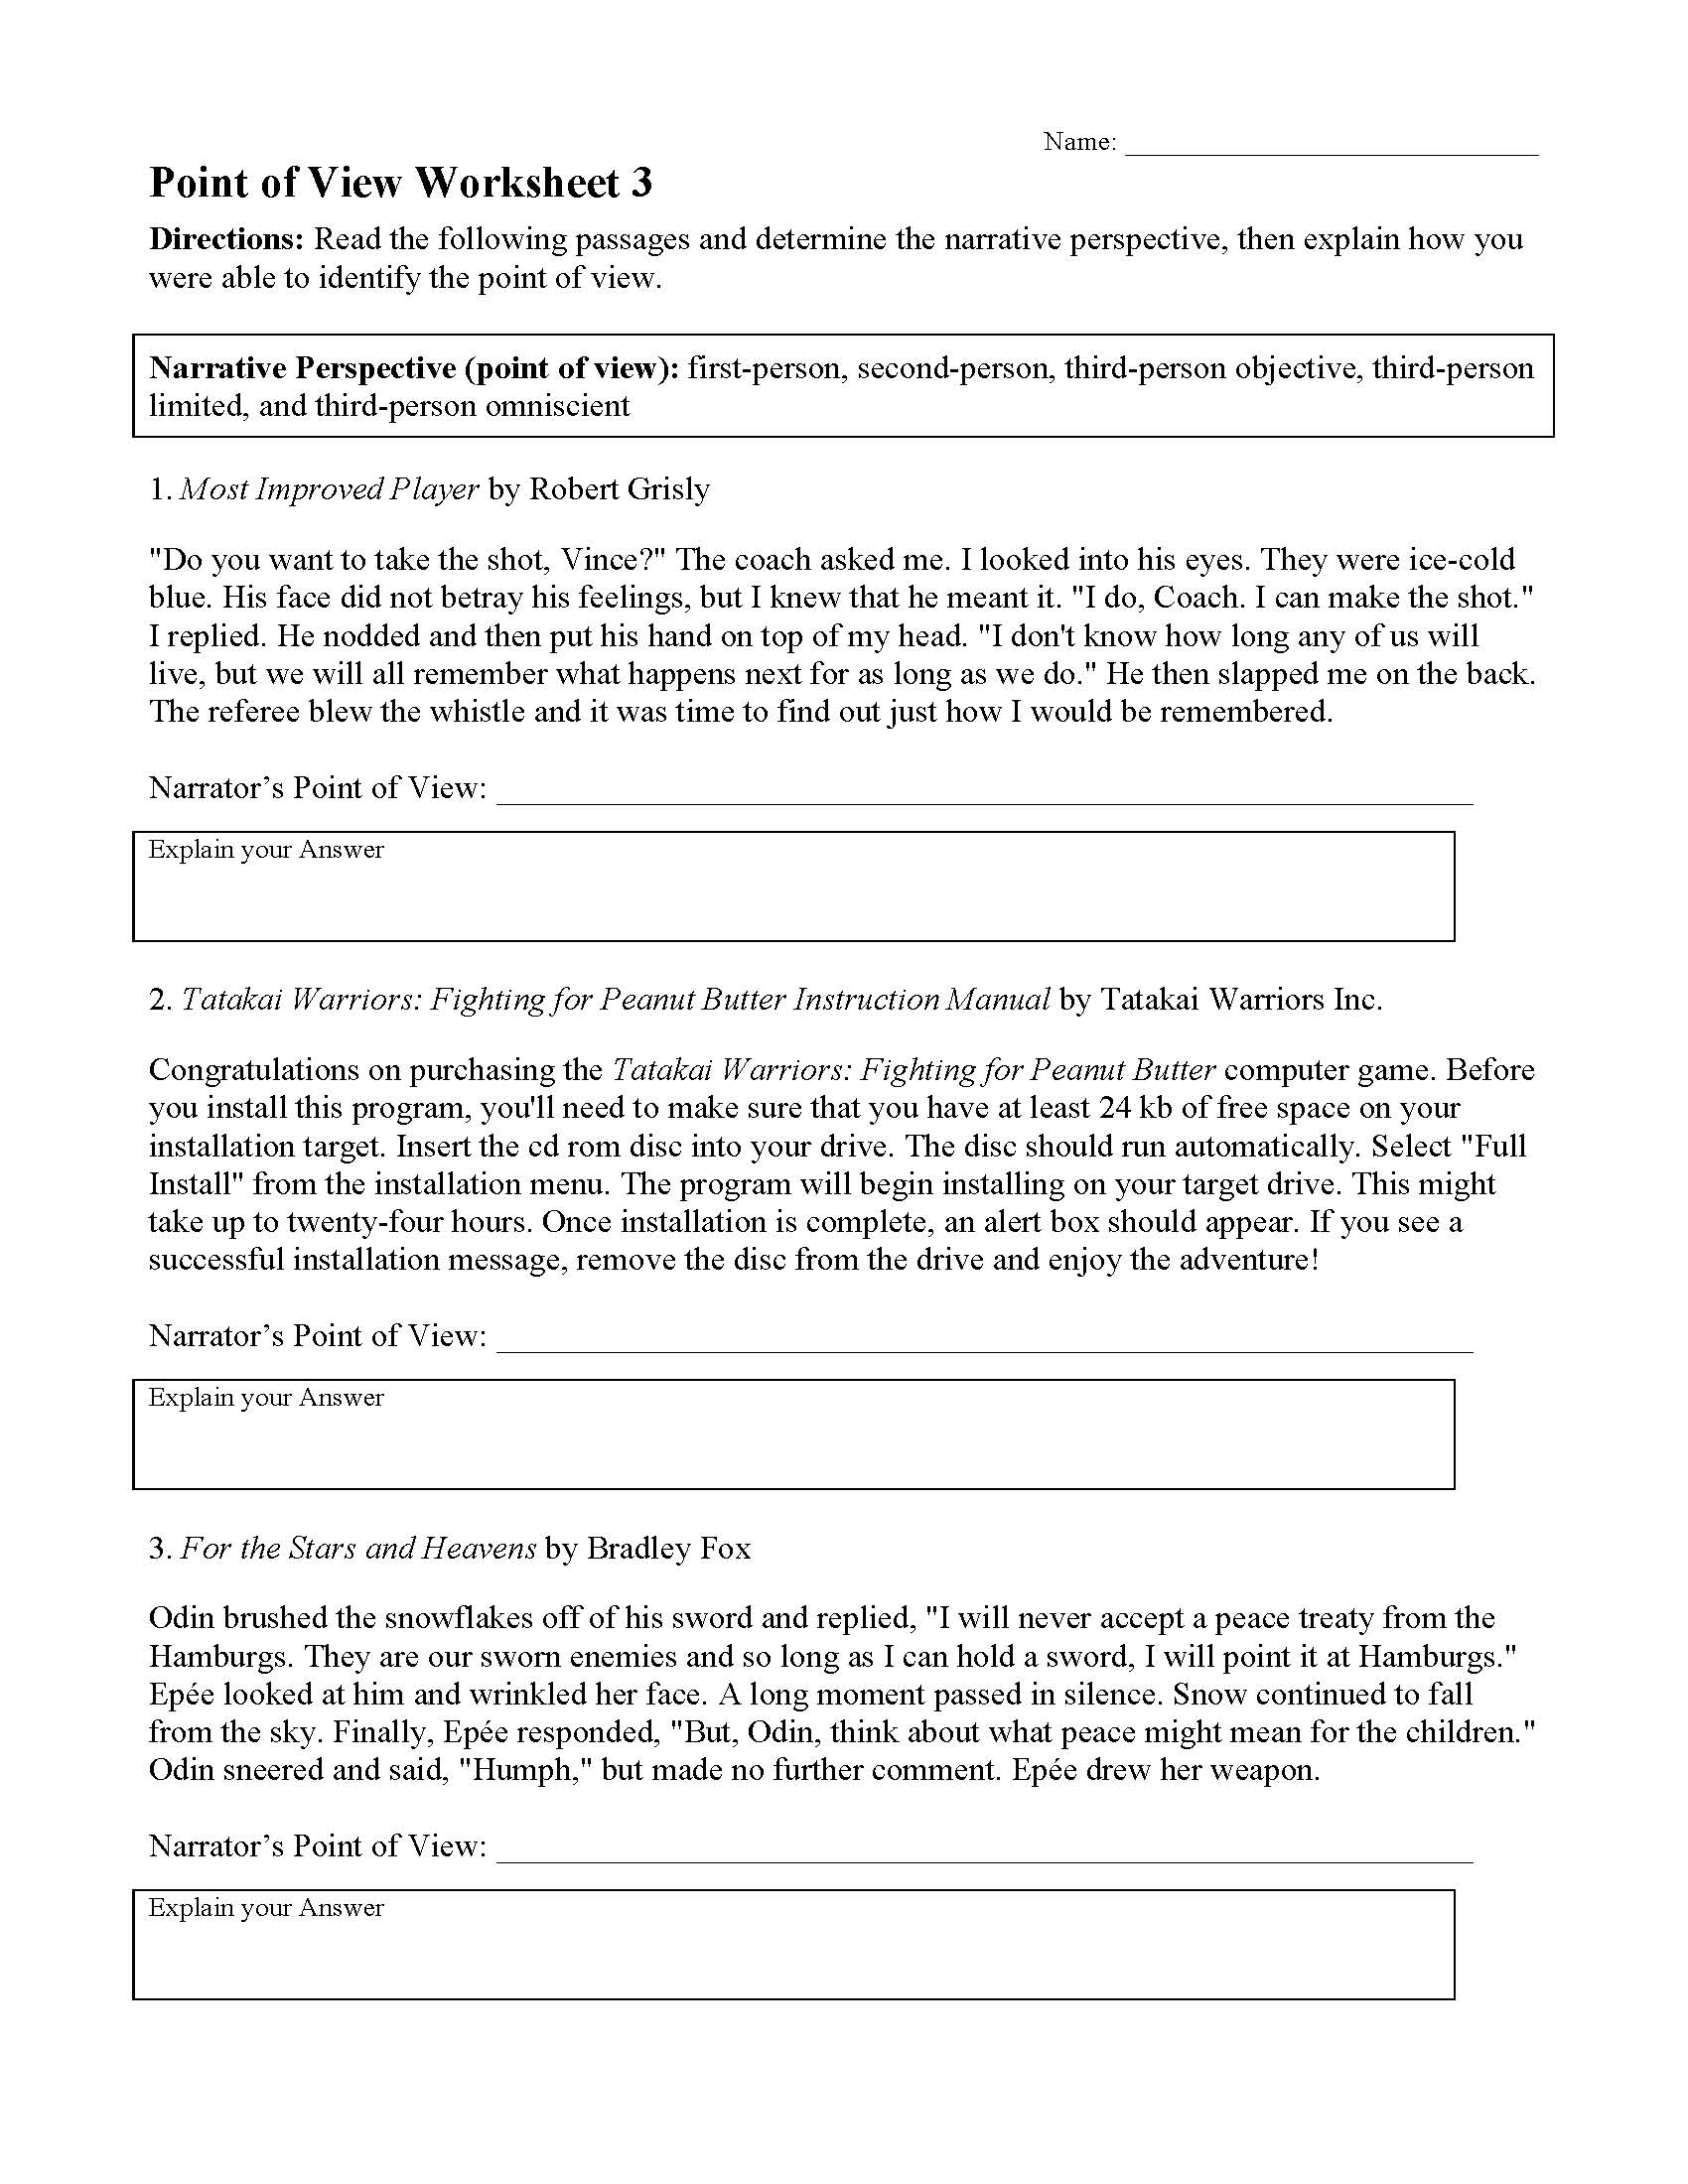 This is a preview image of Point of View Worksheet 3. Click on it to enlarge it or view the source file.